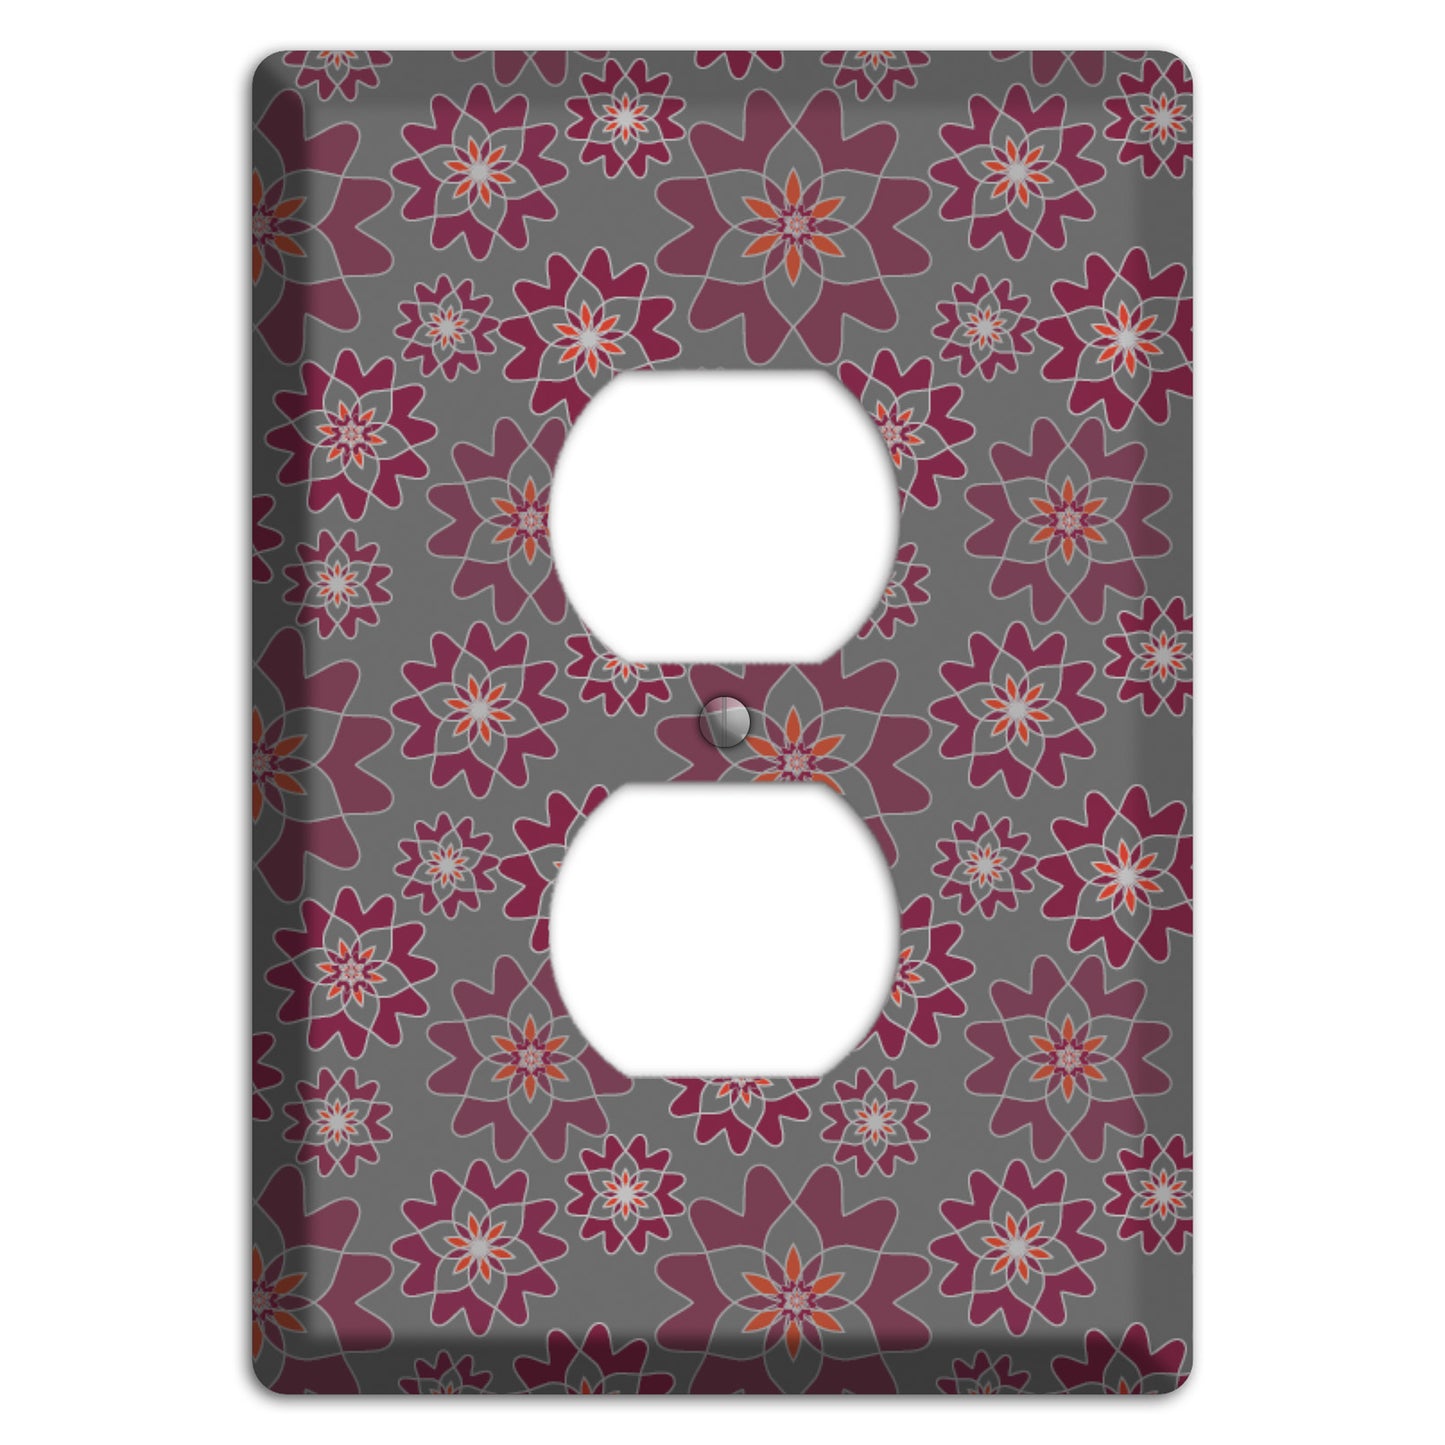 Grey with Burgundy Retro Suzani Duplex Outlet Wallplate